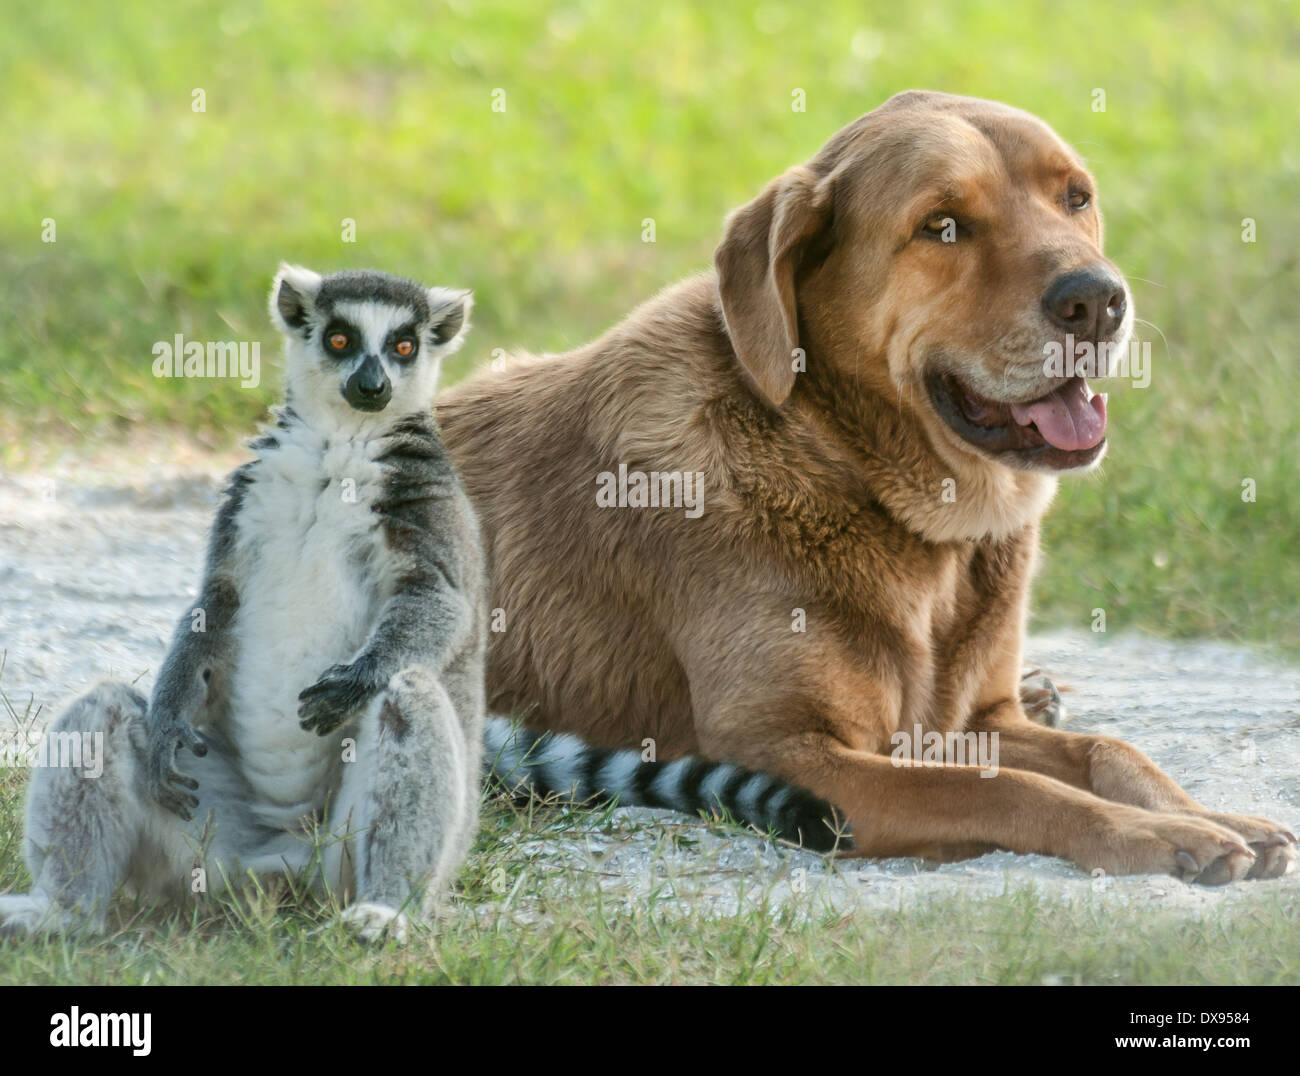 Ring Tail Lemur and dog friend Stock Photo